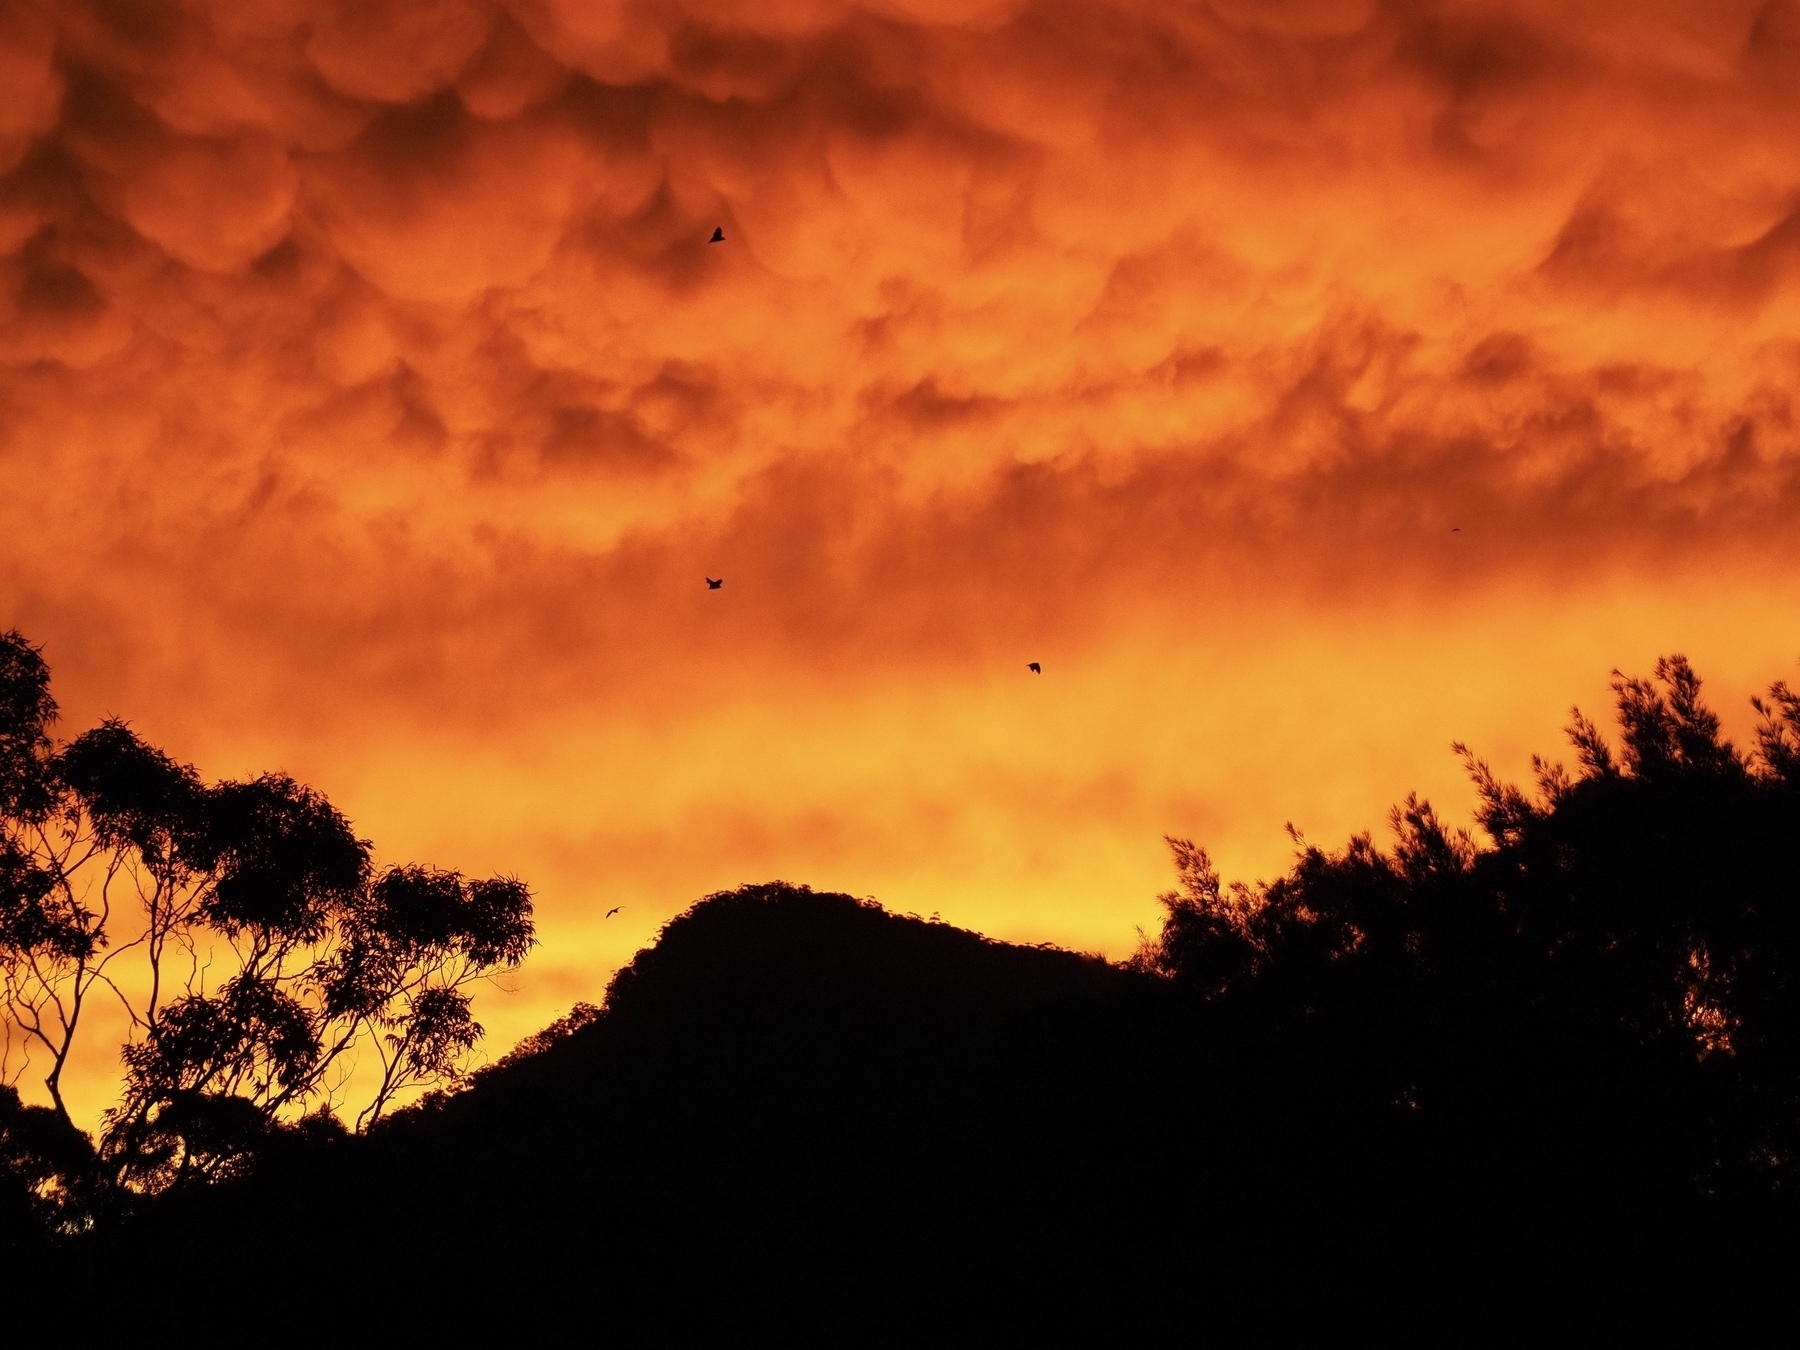 The silhouettes of a mountain and trees with bats flying against a cloudy, burnt-orange sky